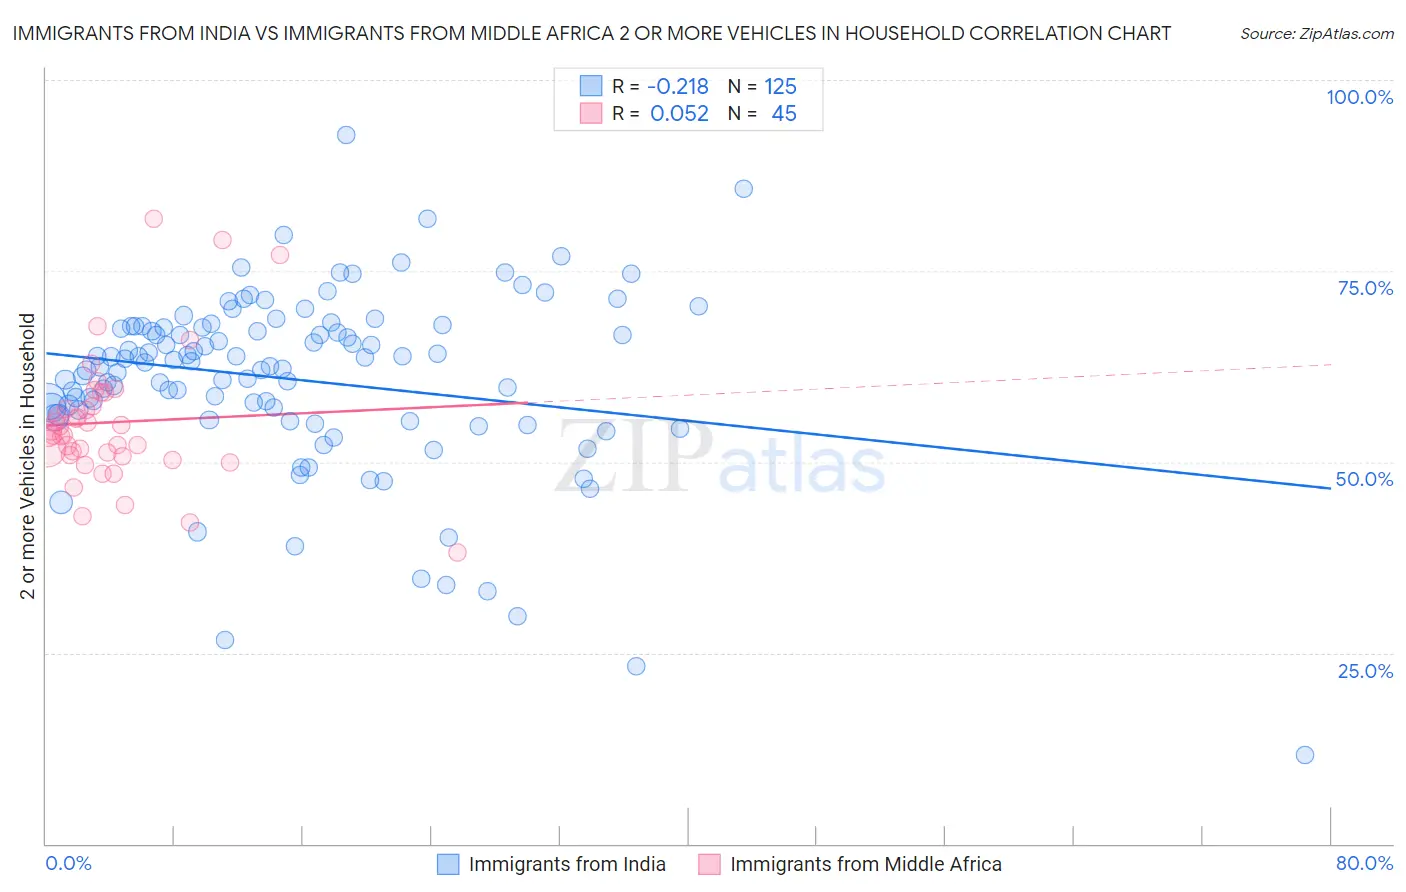 Immigrants from India vs Immigrants from Middle Africa 2 or more Vehicles in Household